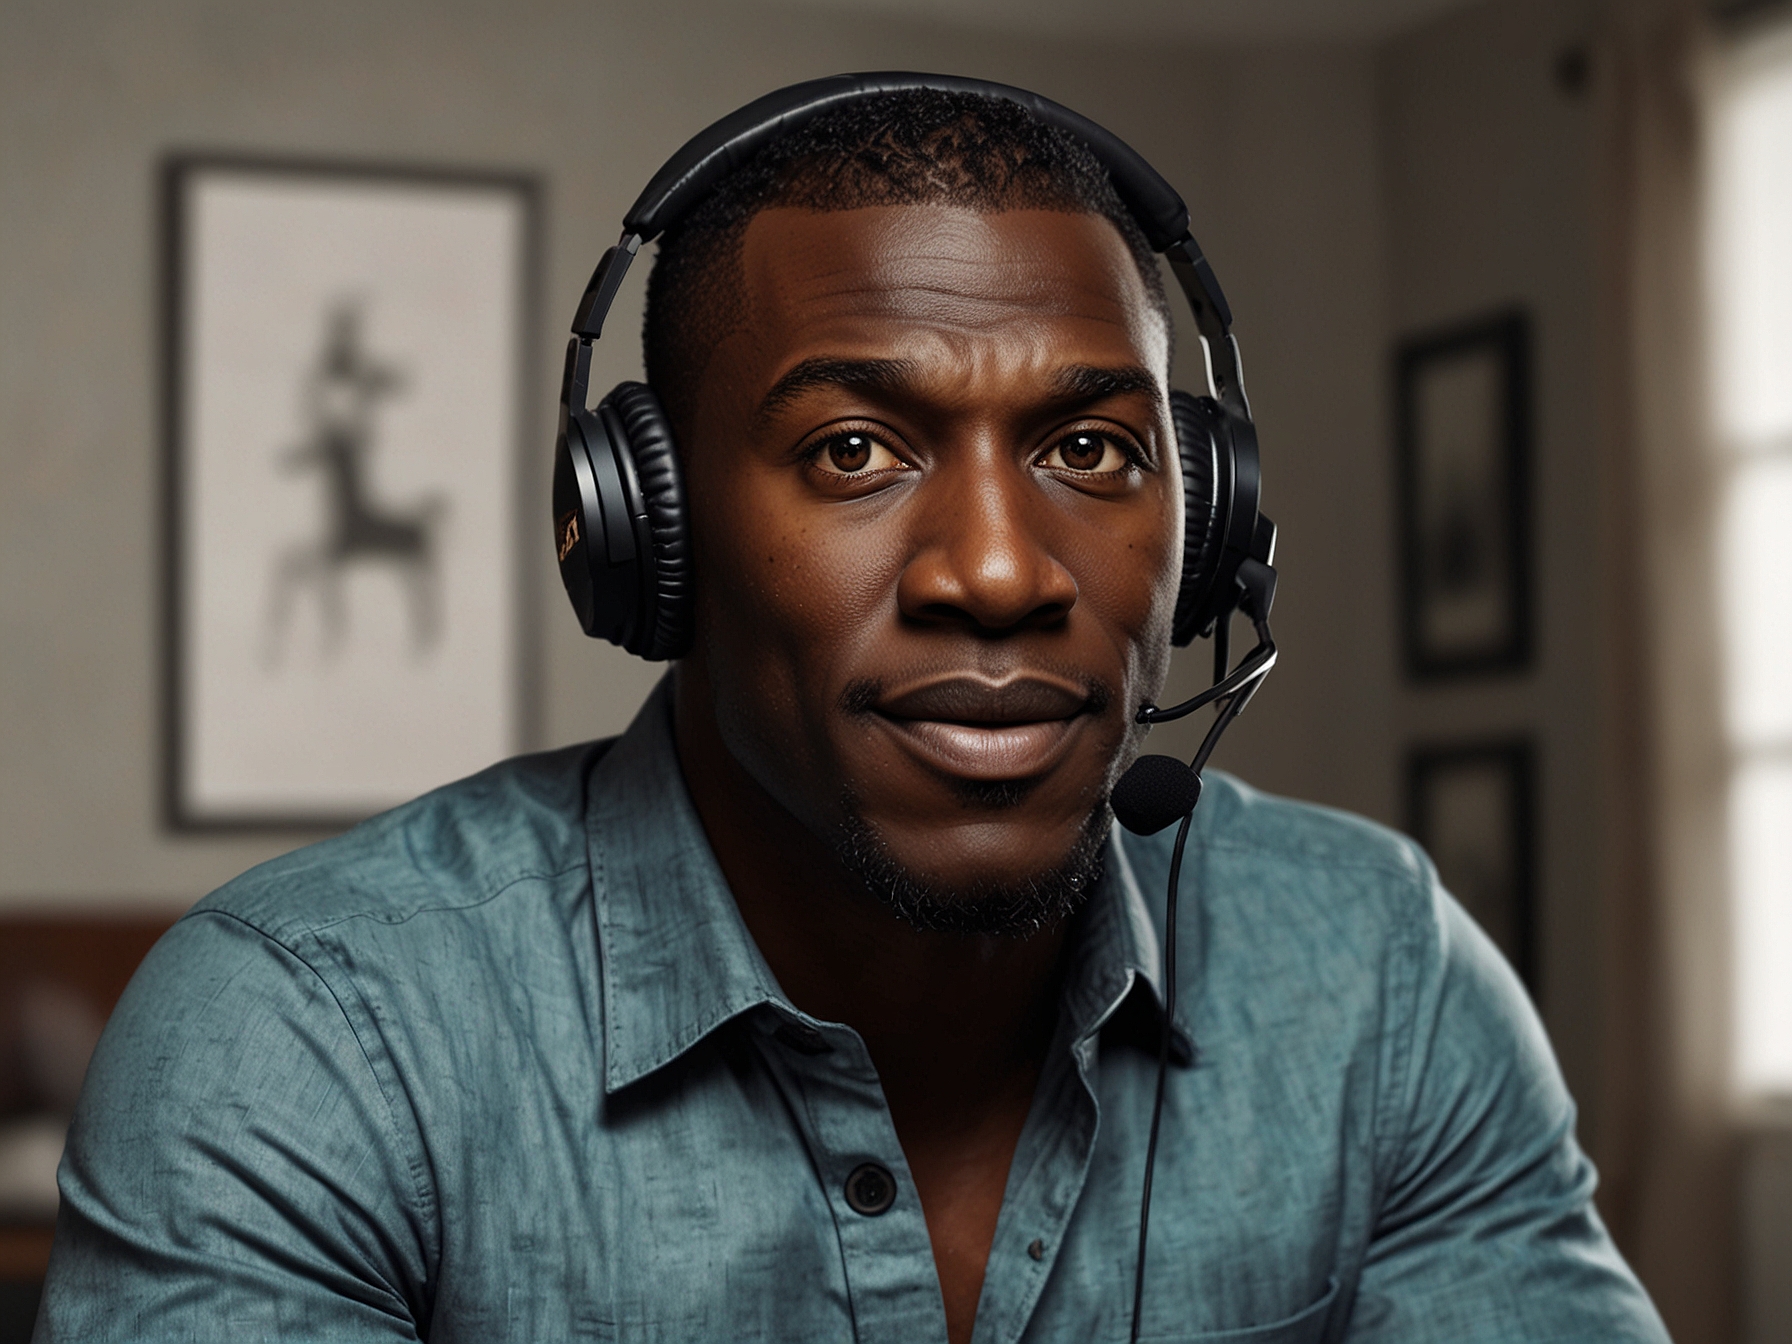 Shannon Sharpe during a podcast interview, discussing his personal decision to not sleep at women's homes, highlighting the emphasis on safety, control, and mental well-being.